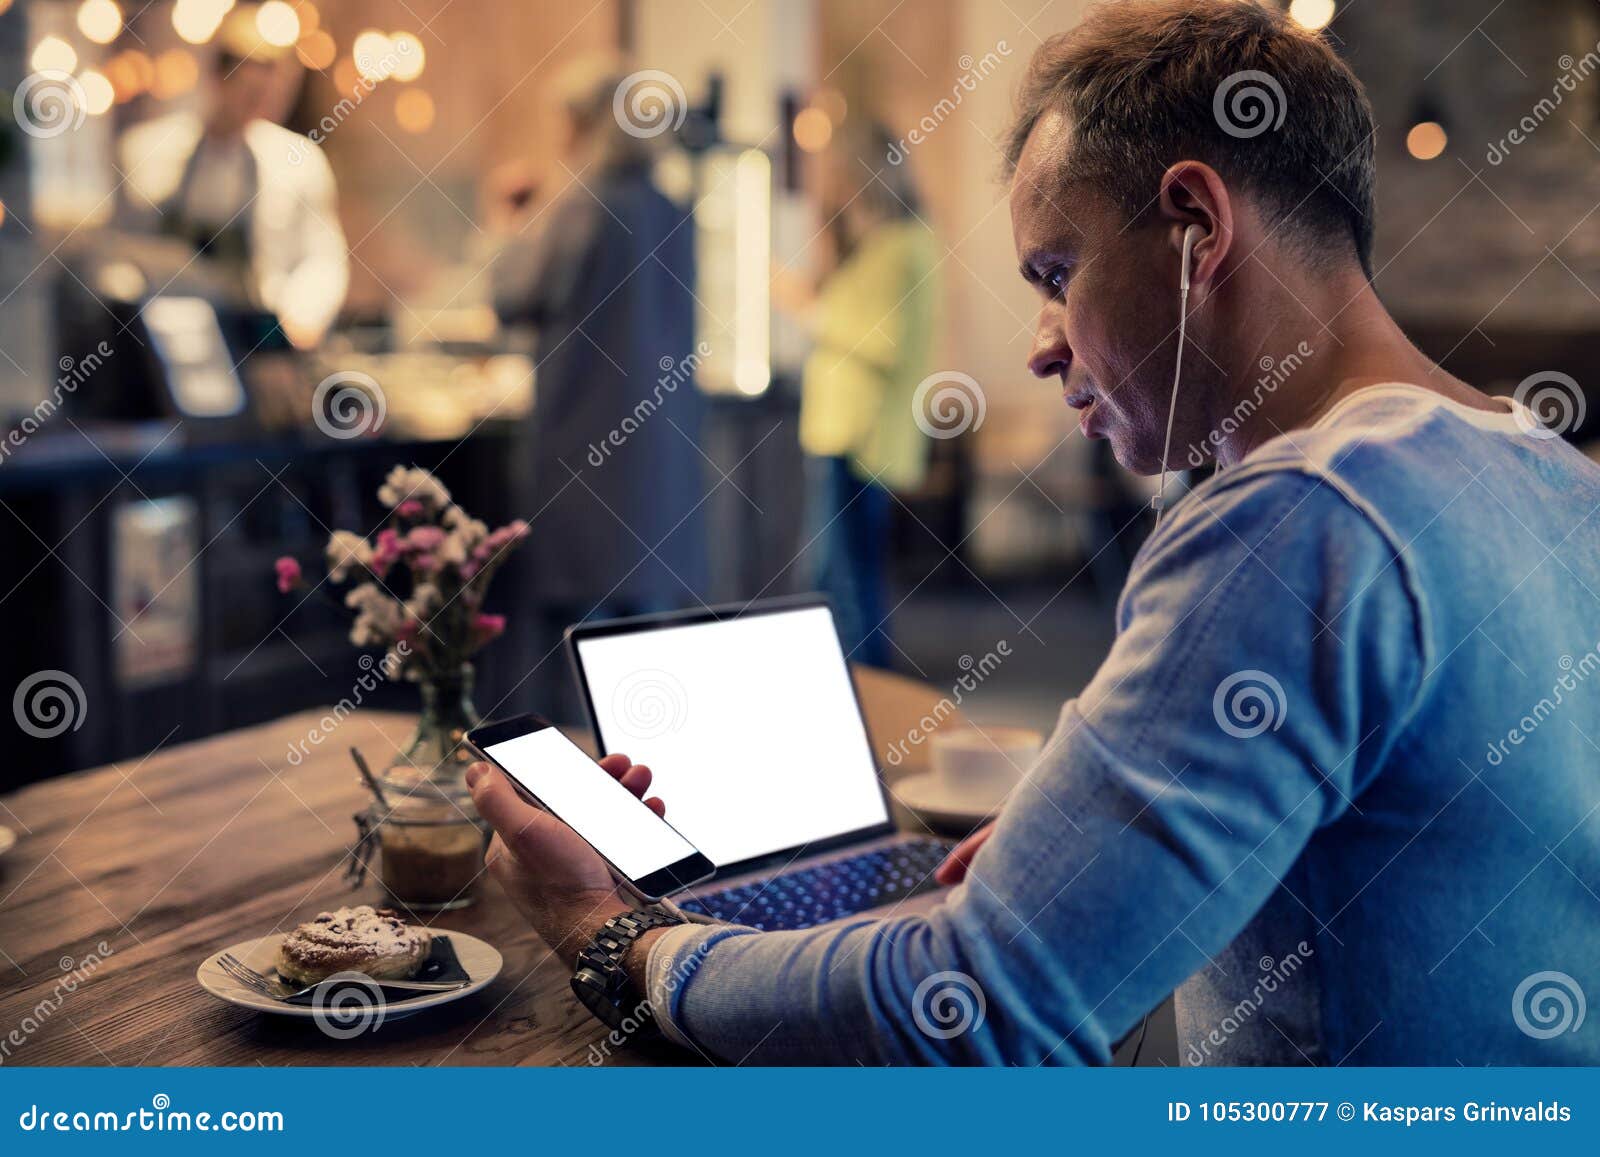 man using tech gadgets in cafe